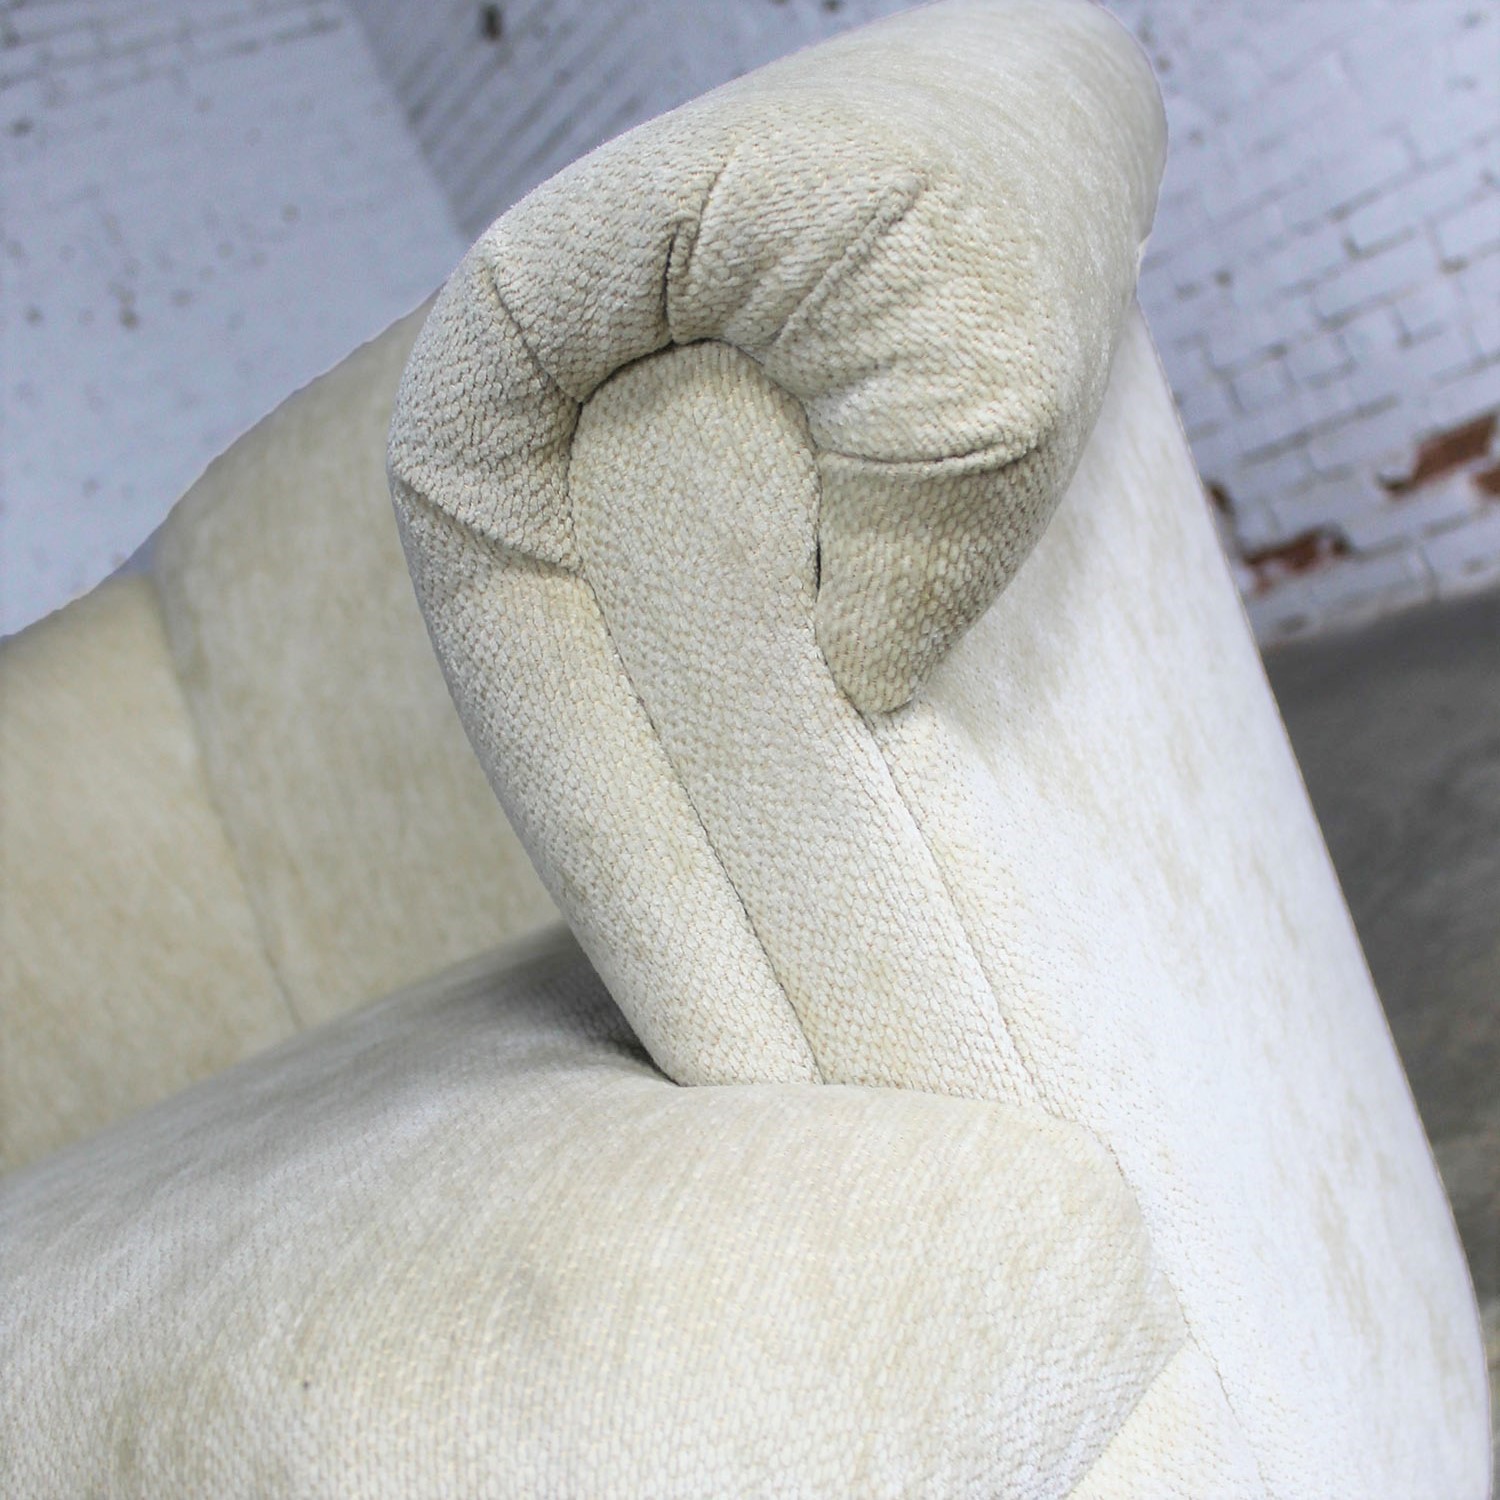 Barrel Shaped Off White Vintage Swivel Club Chair with Rolled Arms